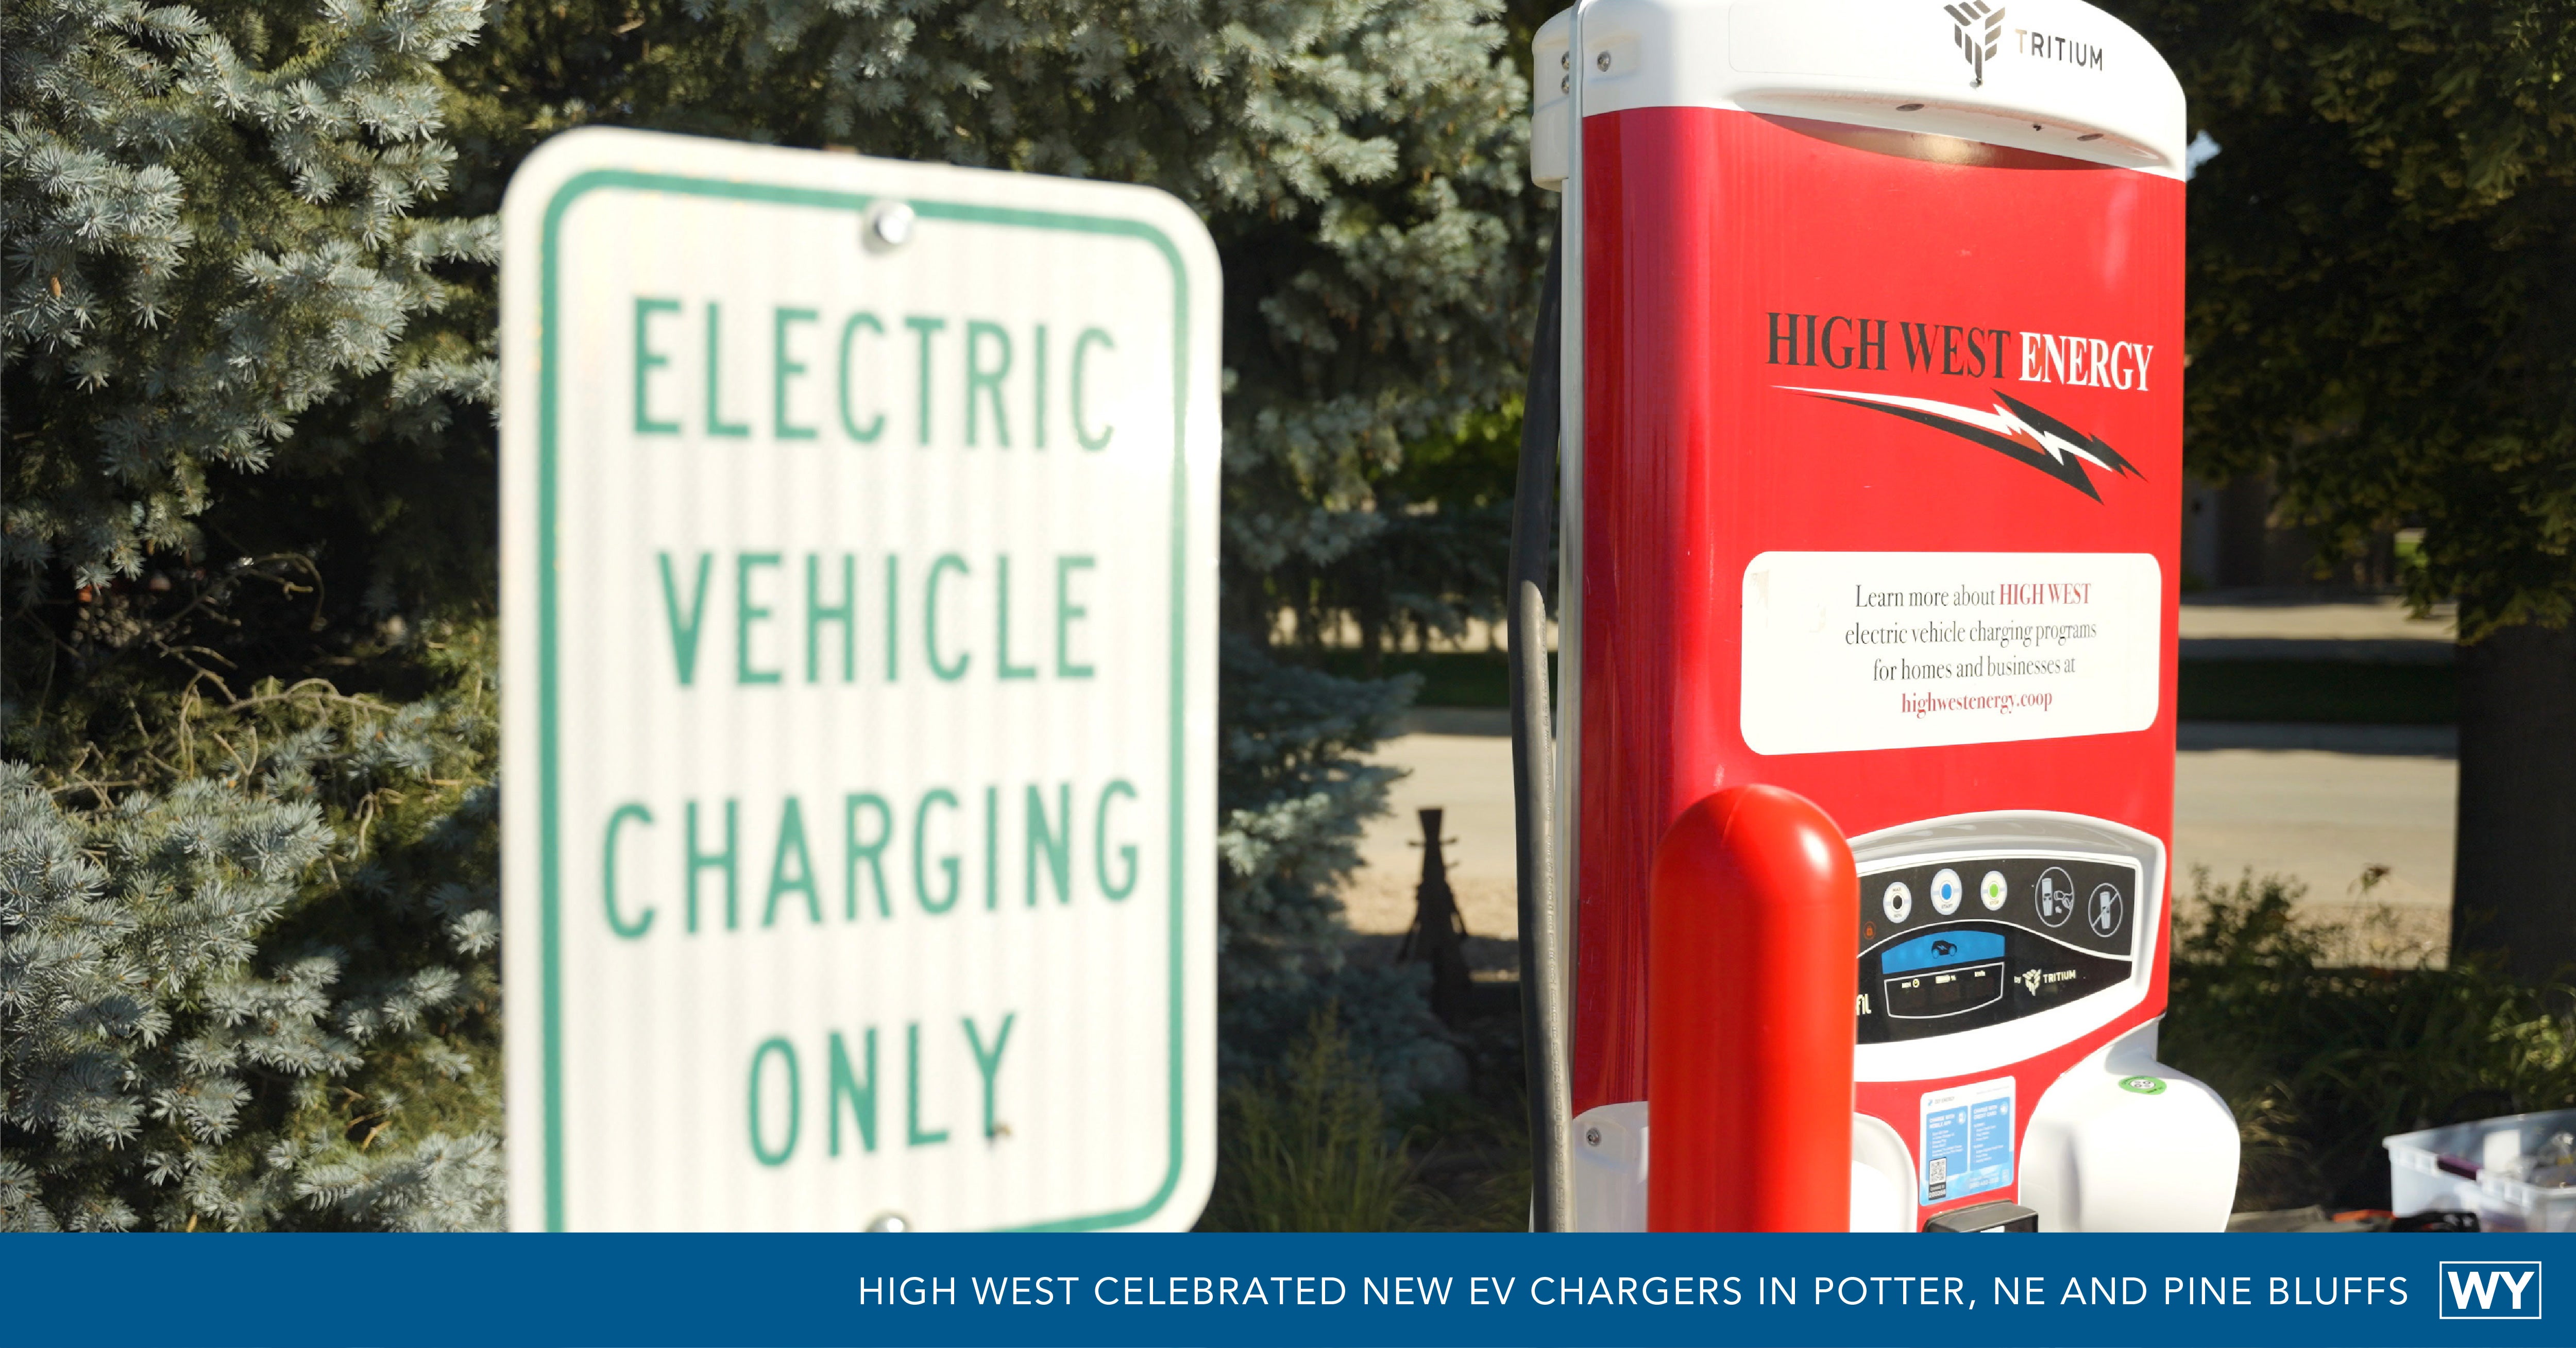 Closing the Gap: High West Energy Launches Two New EV Charging Stations